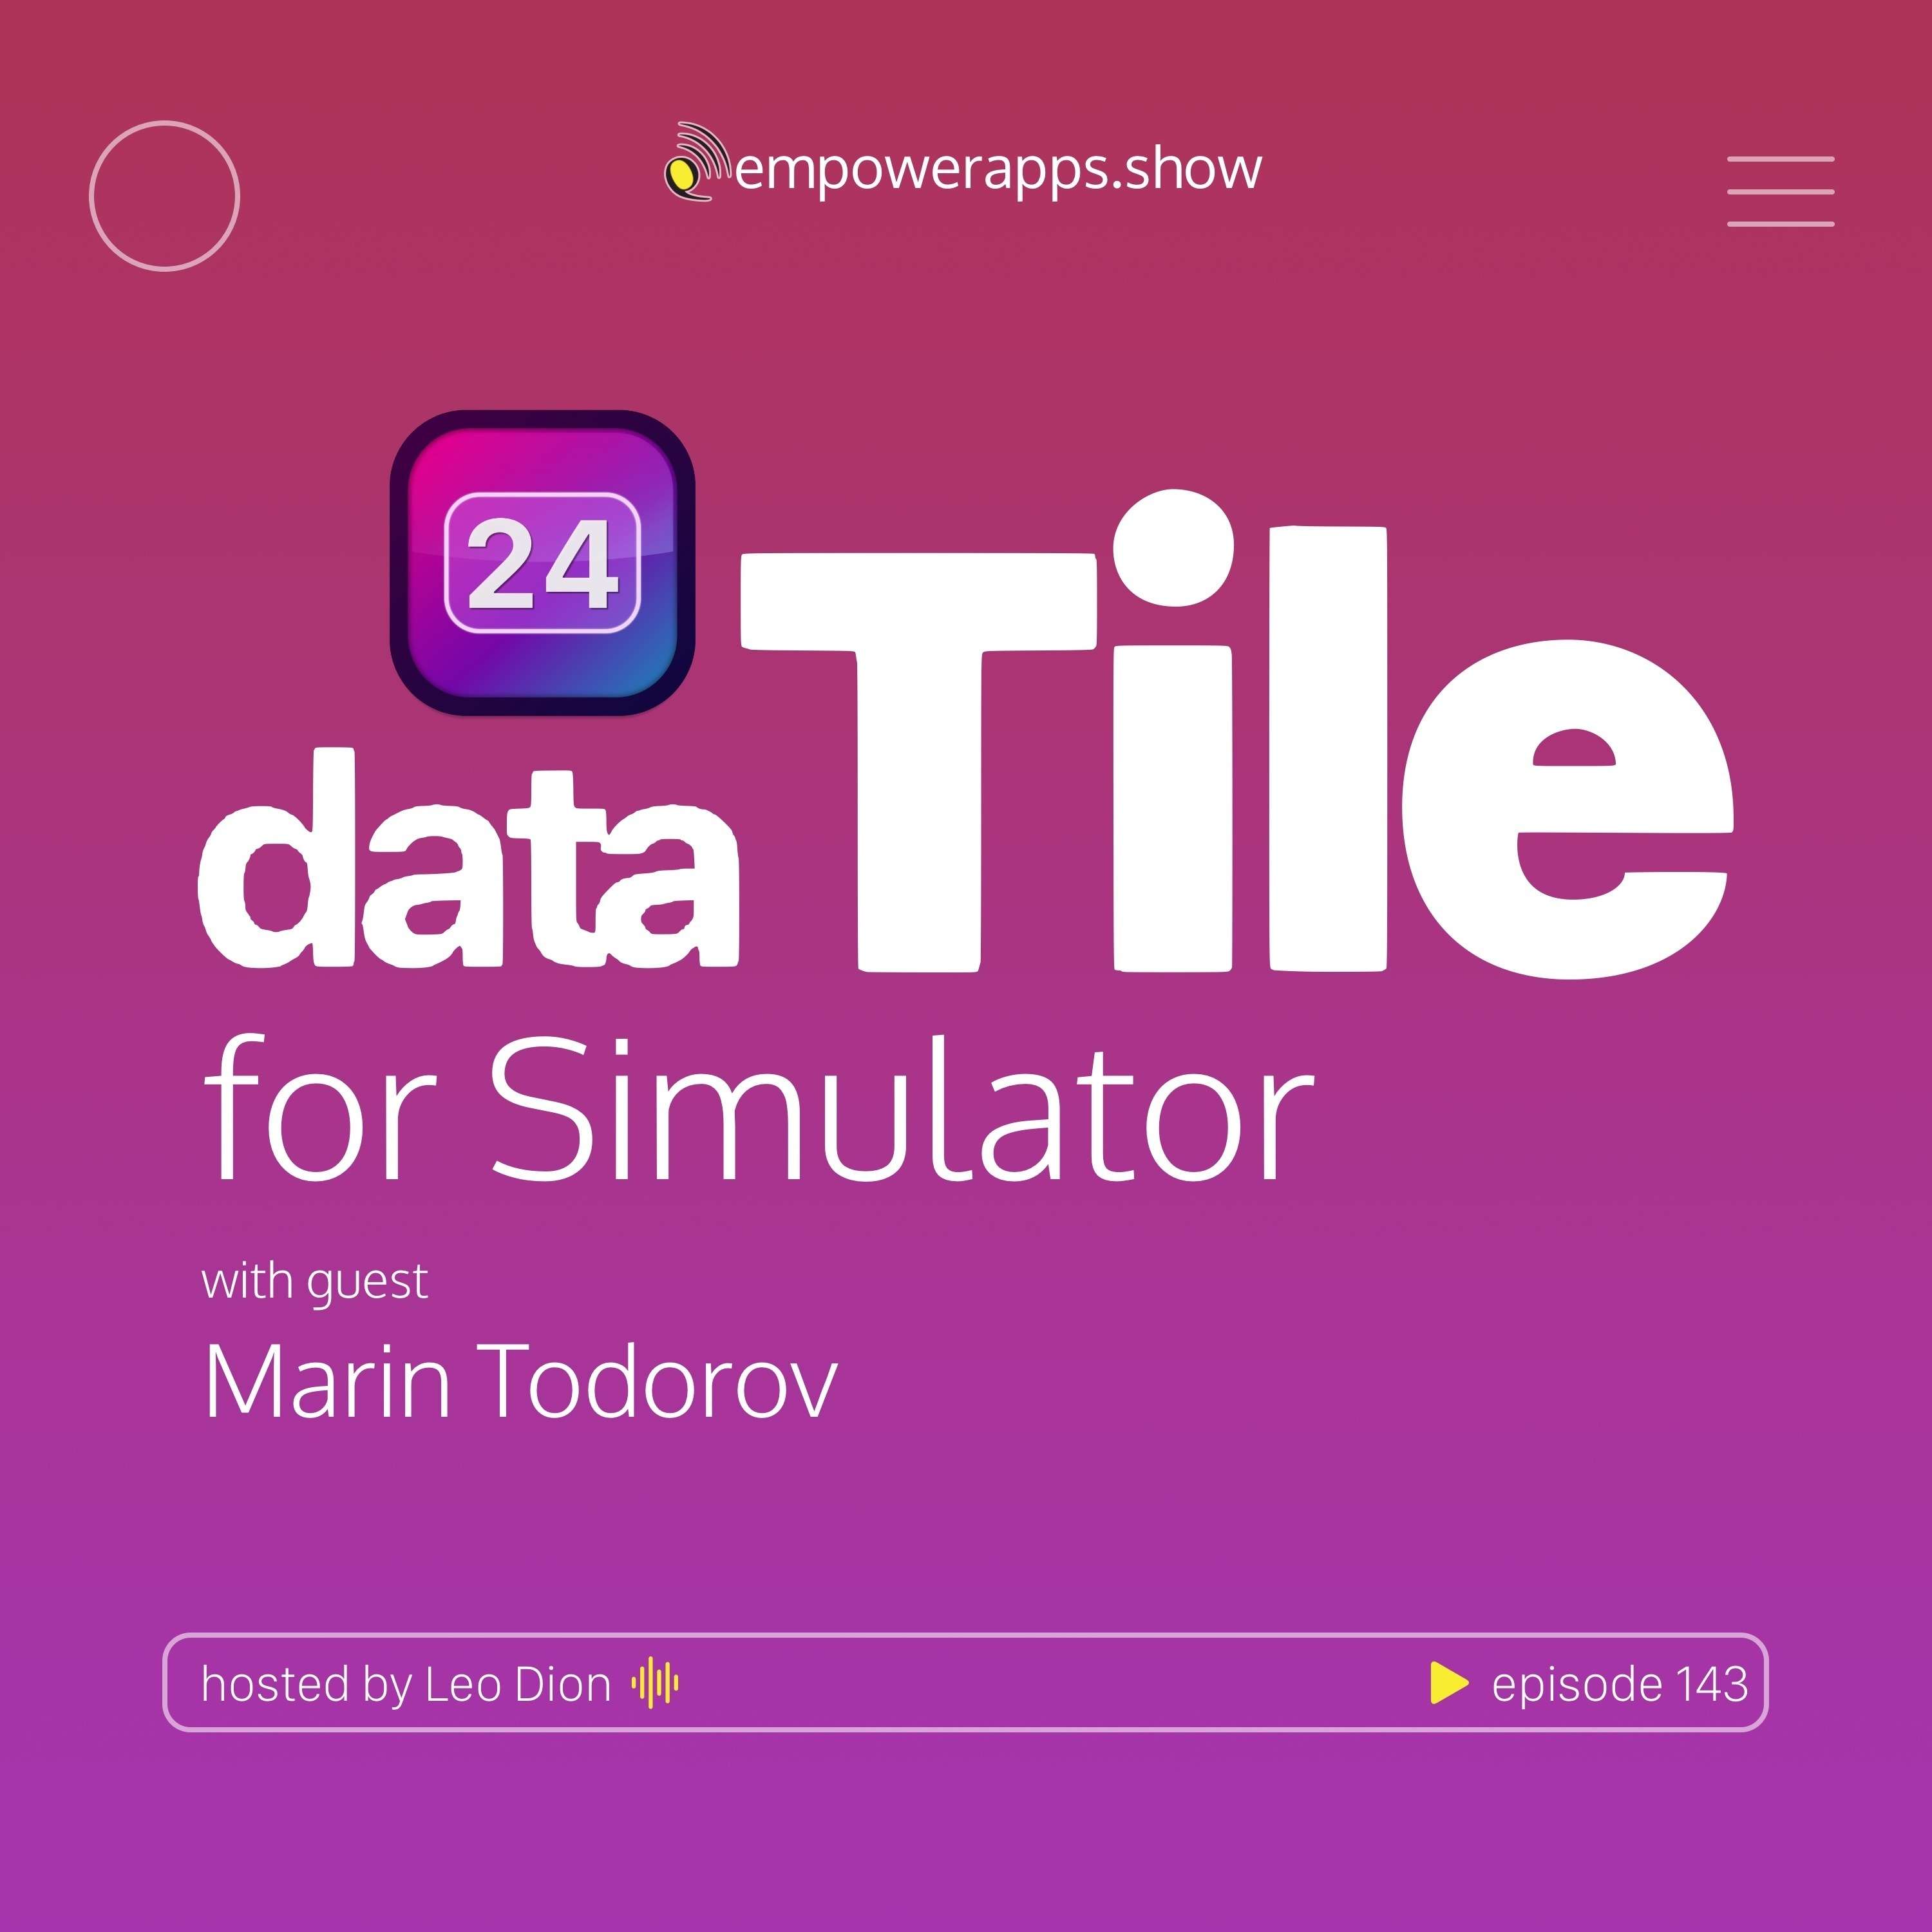 dataTile for Simulator with Marin Todorov